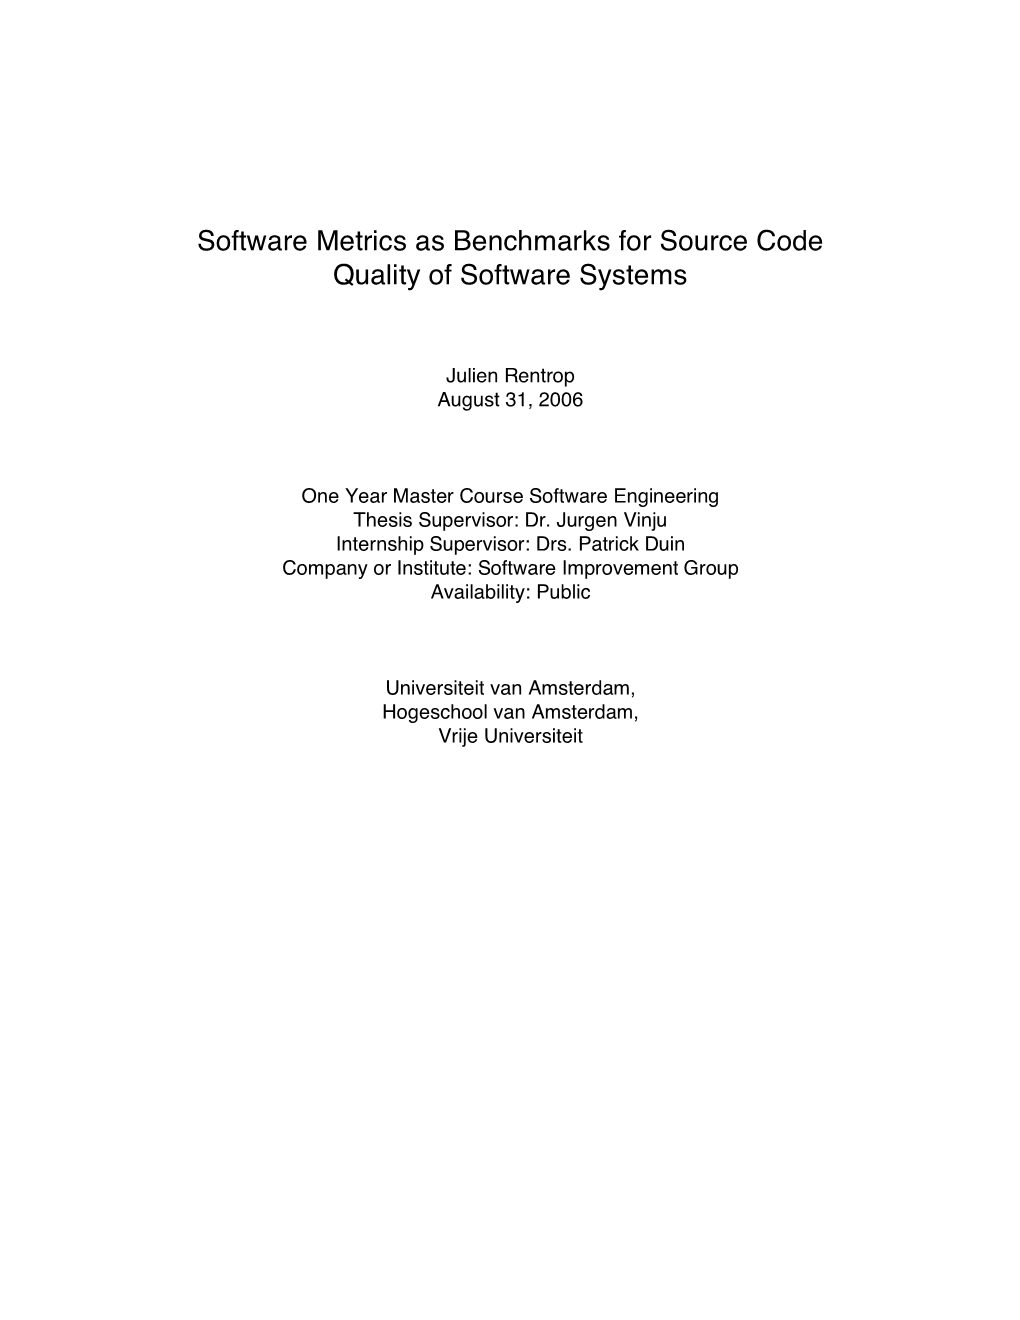 Software Metrics As Benchmarks for Source Code Quality of Software Systems